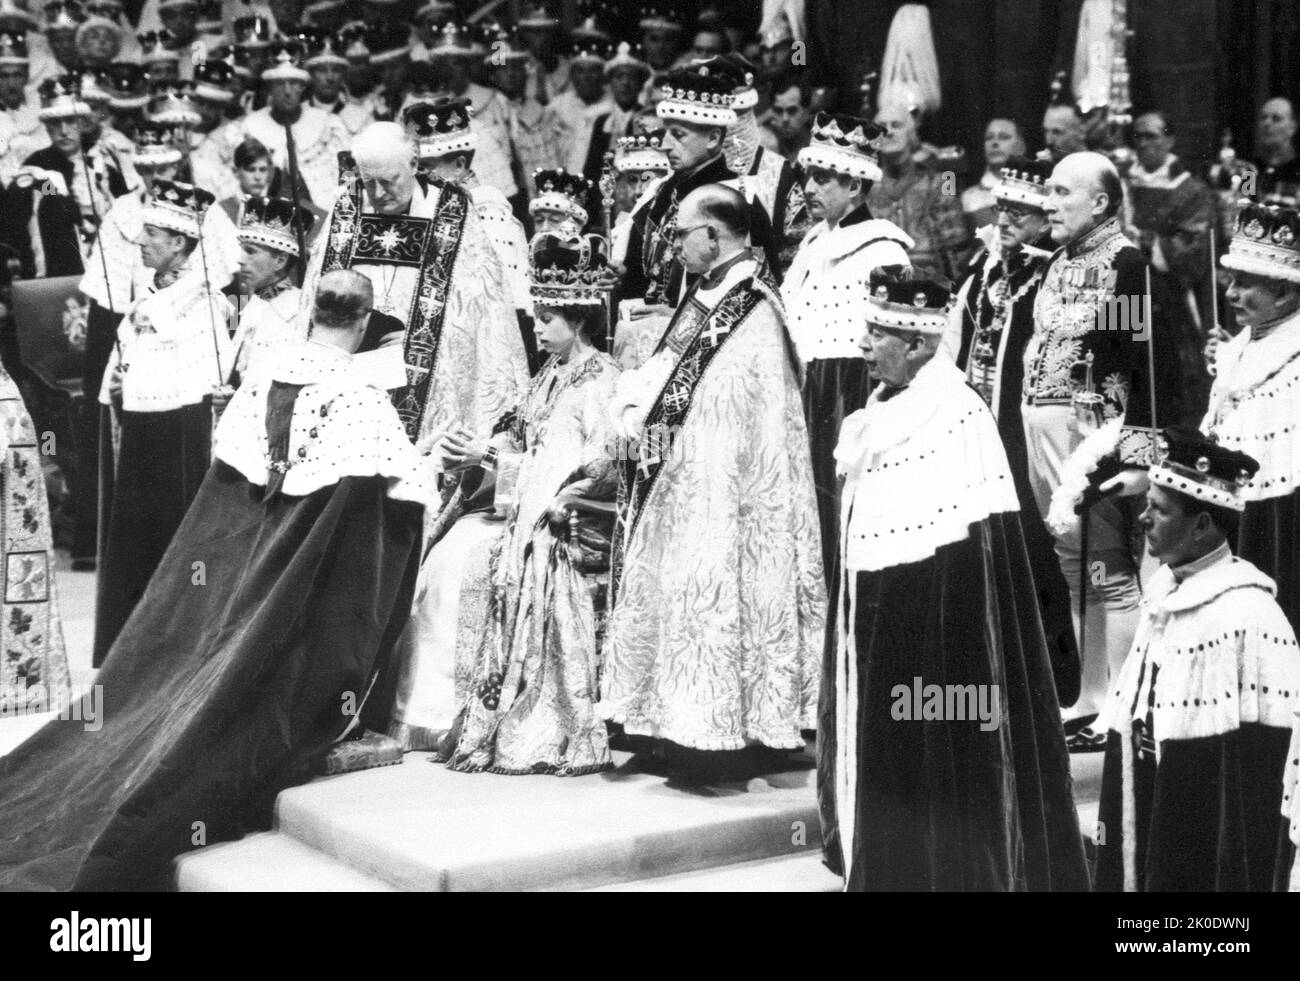 File photo dated 02/06/53 of Queen Elizabeth II receives the homage of the Duke of Edinburgh (her husband) at her coronation in London's Westminster Abbey as the Queen's funeral venue is where she was married and crowned. The monarch had close connections to the church - a focal point during times of national celebration and sadness. The Queen was married and crowned at Westminster Abbey. Now the bells of the 'House of Kings' - half muffled in mourning - will ring out at her funeral. It will be the first time in over 260 years a sovereign’s funeral has taken place in the Abbey. The last was Ge Stock Photo